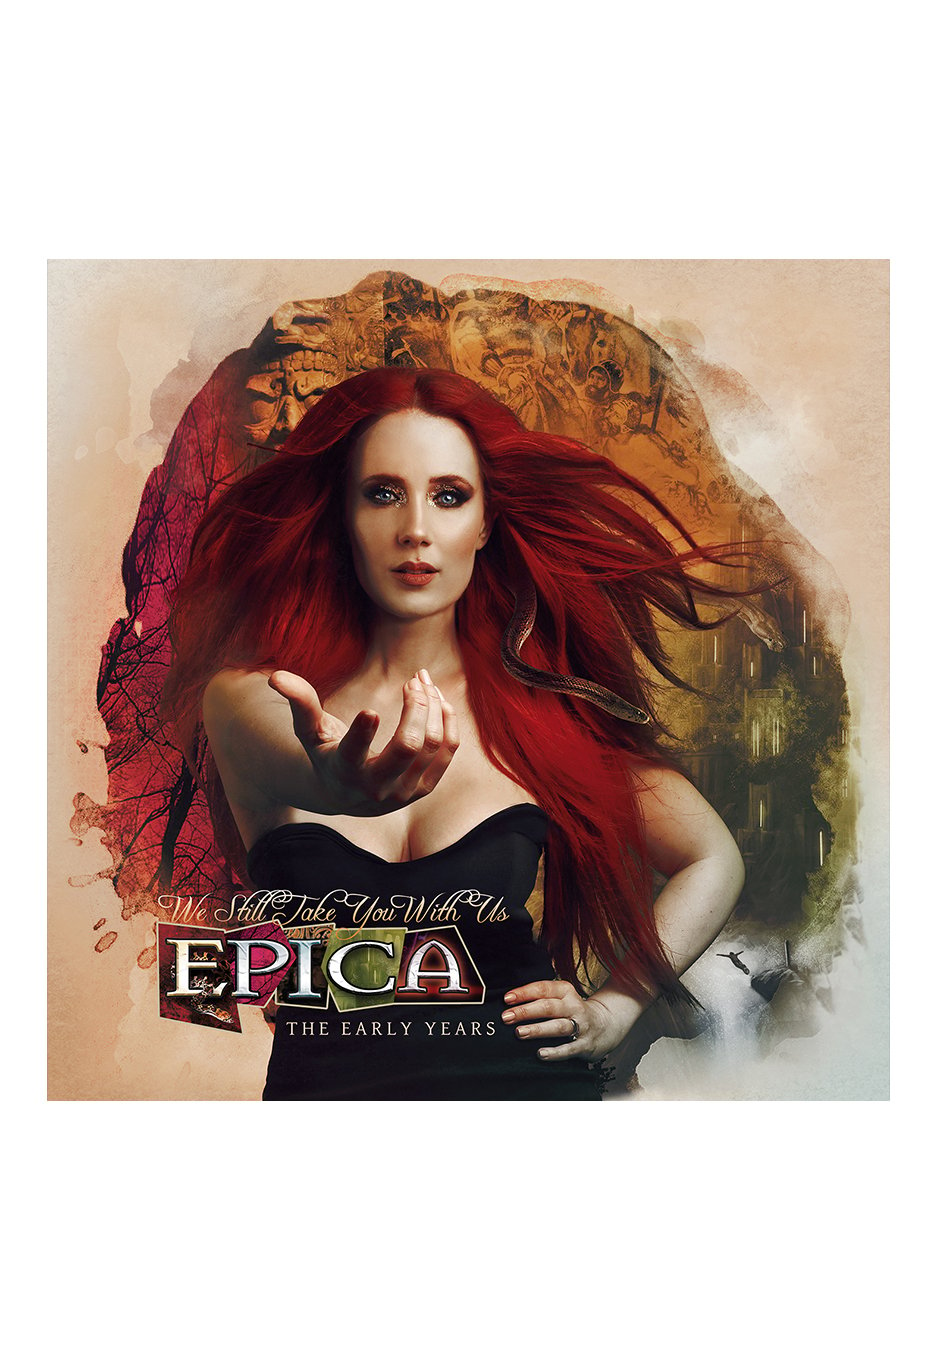 Epica - We Still Take You With Us: The Early Years Ltd. - 4 CD Box